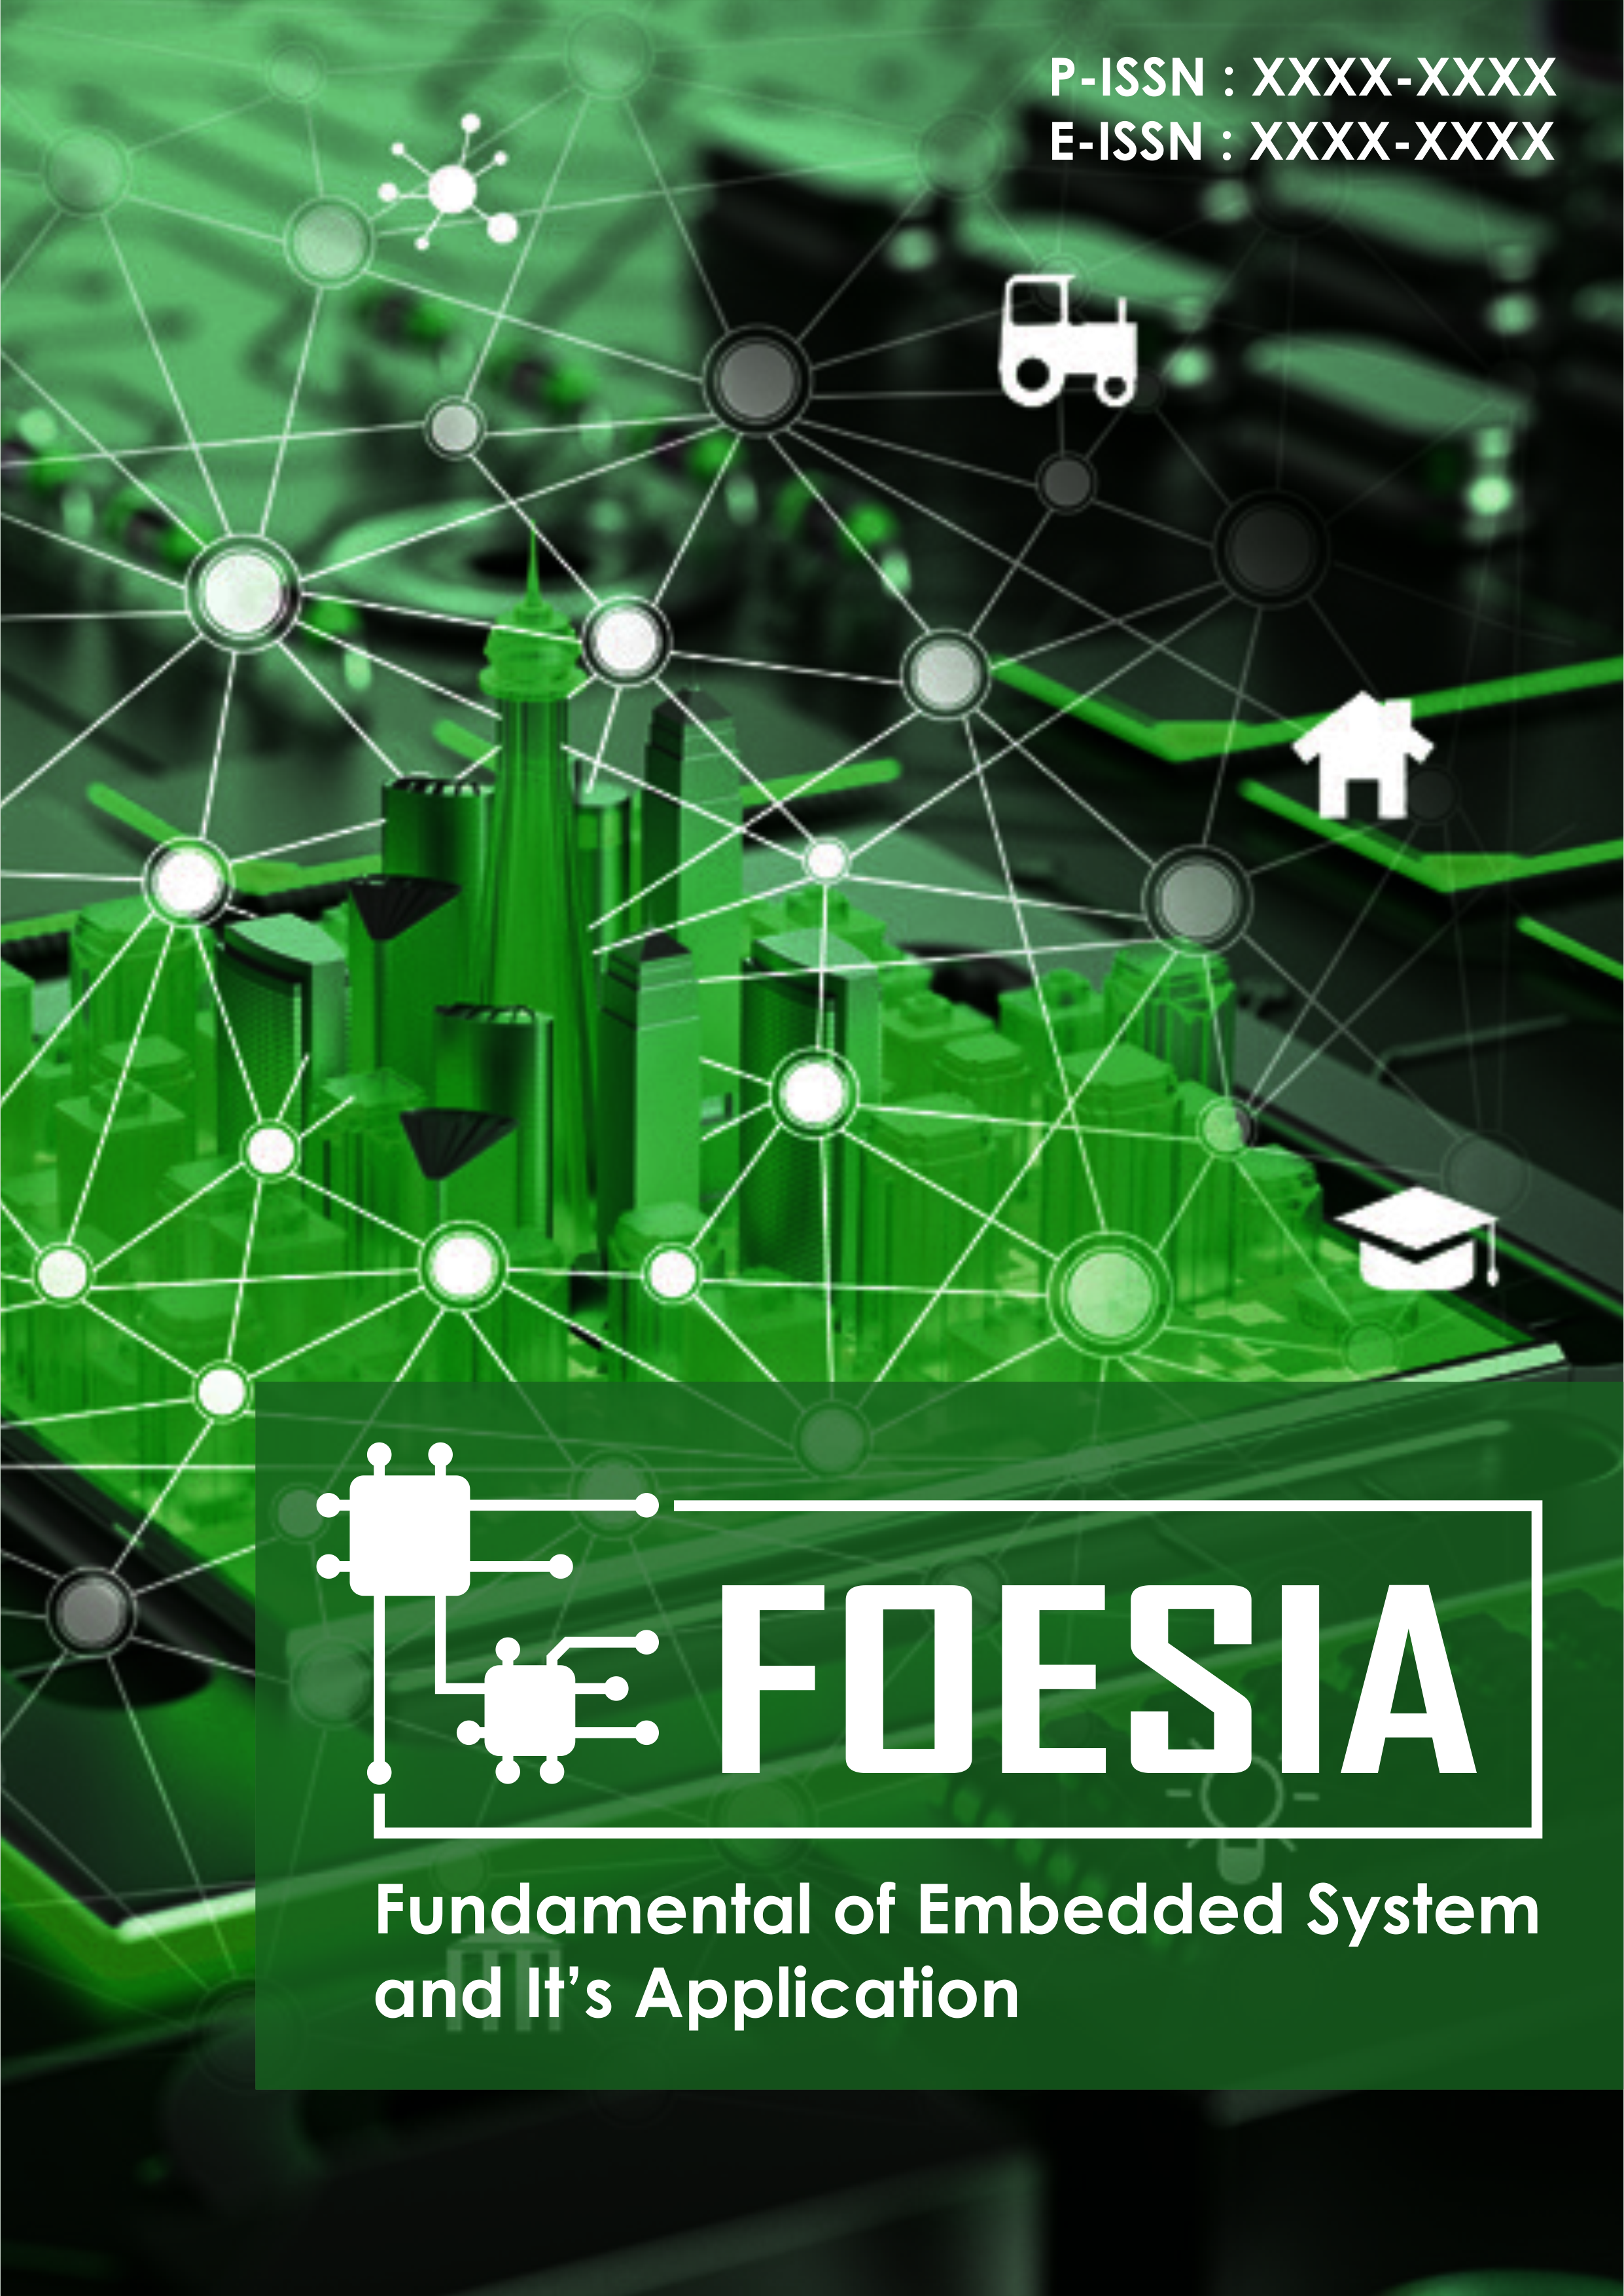 Journal of Fundamental of Embedded System and It's Application